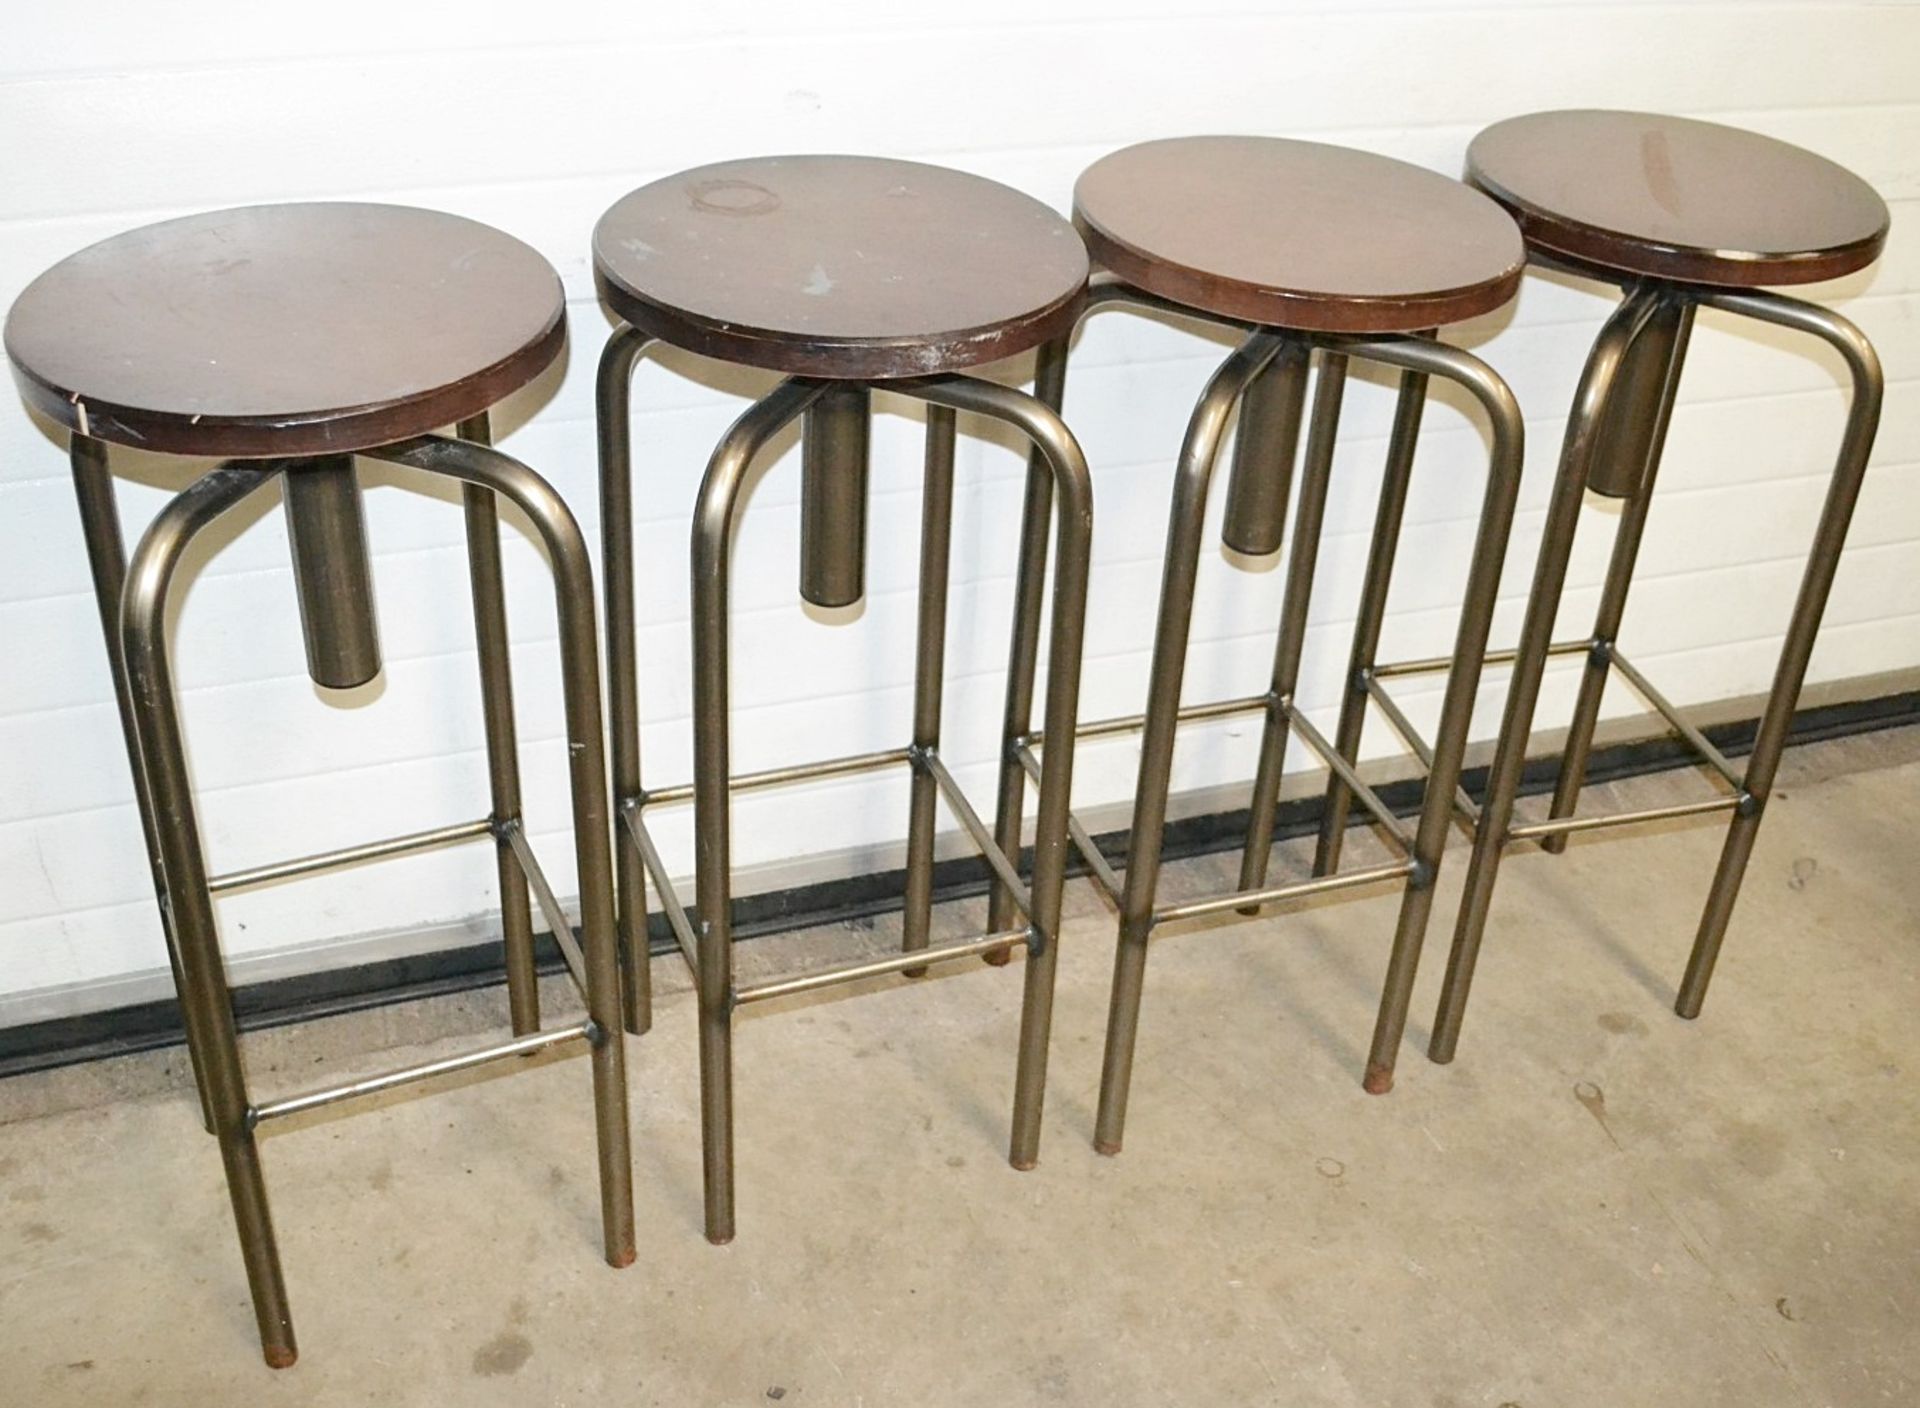 5 x Industrial-Style Tall Commercial Bar Stools With Round Wooden Tops - Dimensions: Height: 81cm, - Image 4 of 4